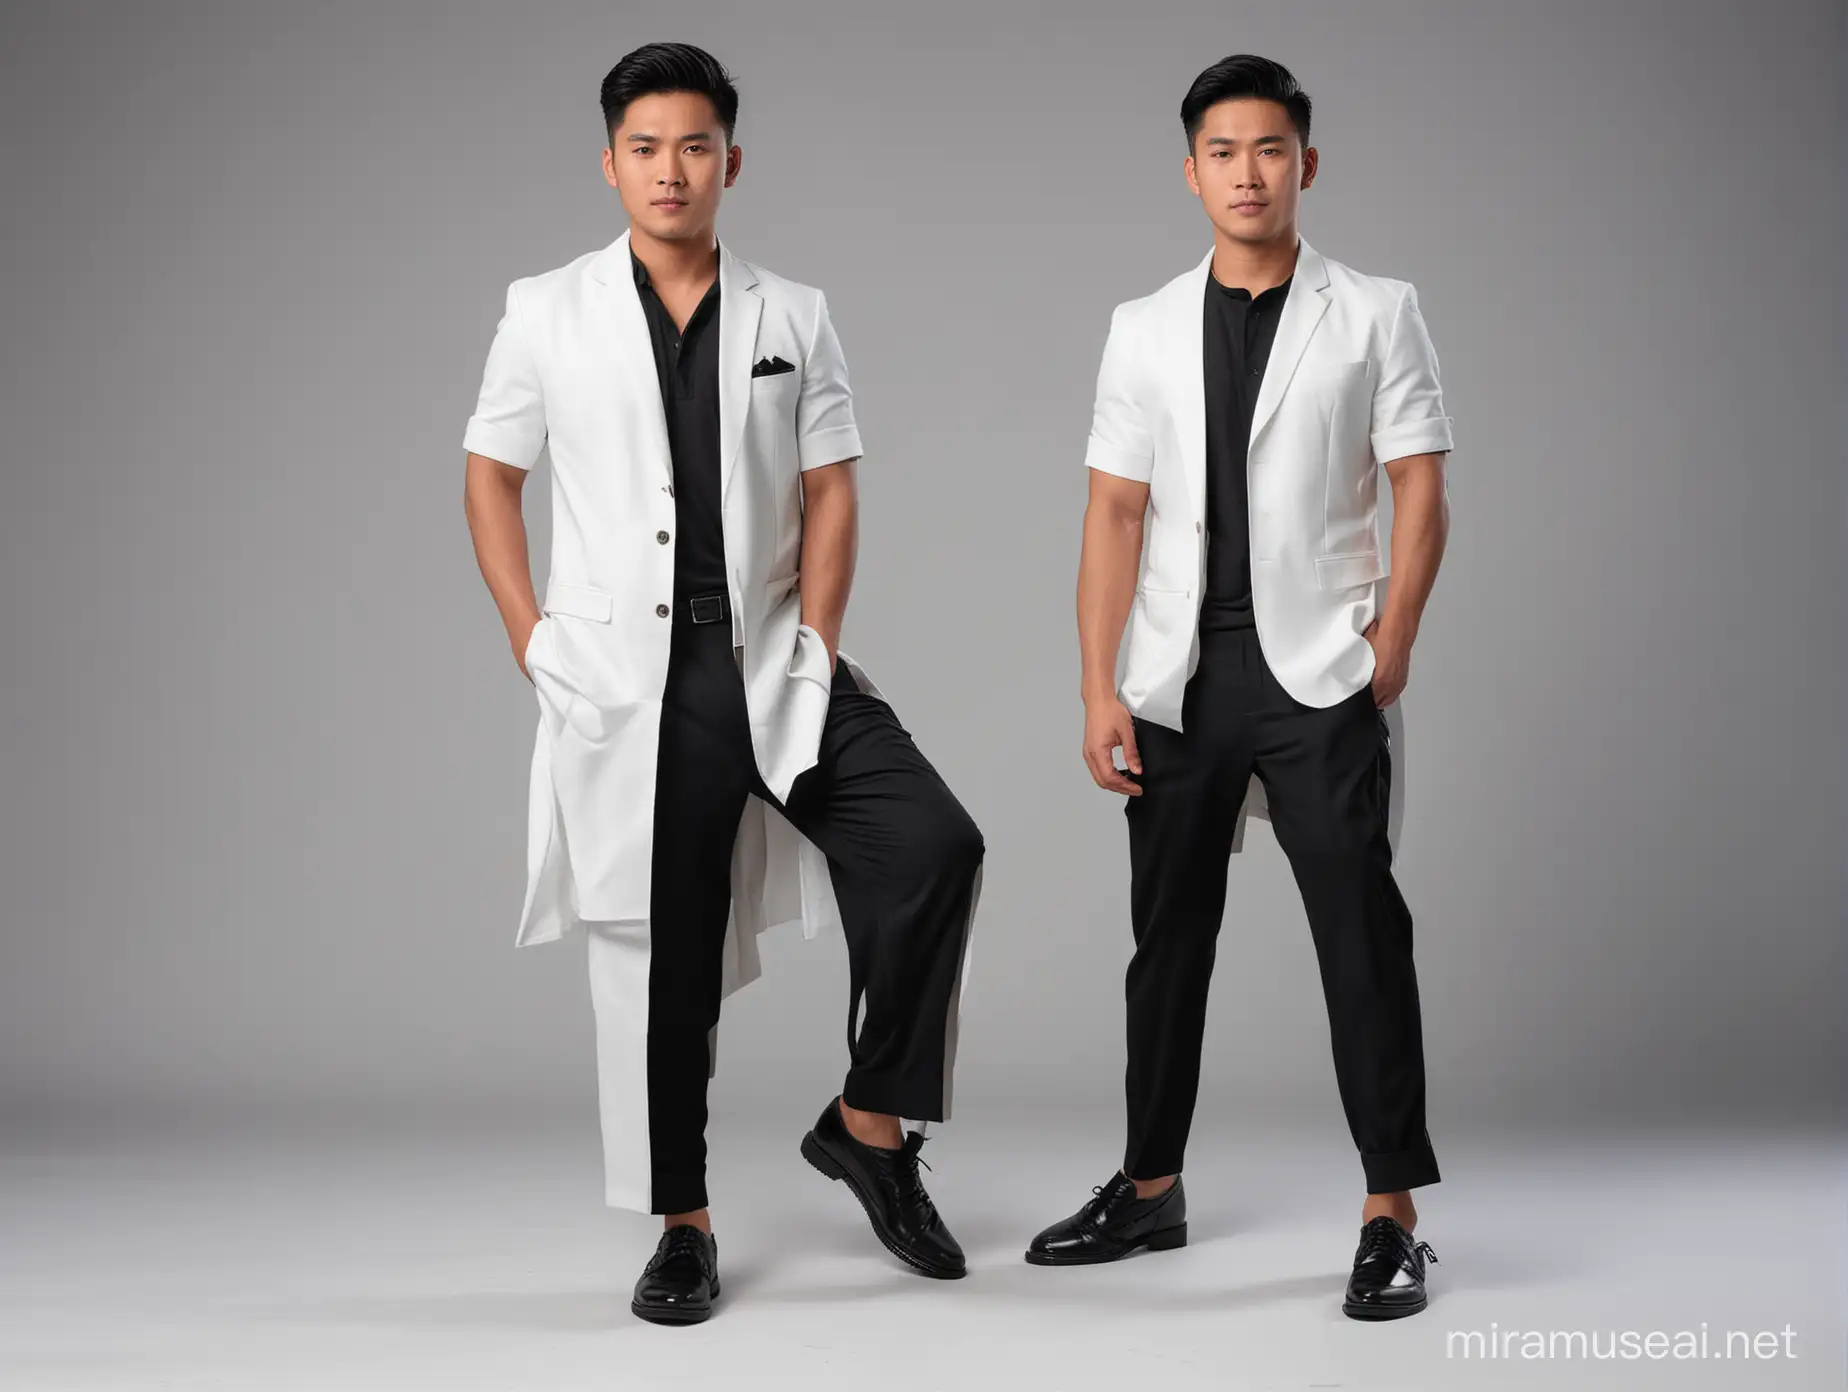 Three Indonesian Men in Stylish White Suits and Black Shirts